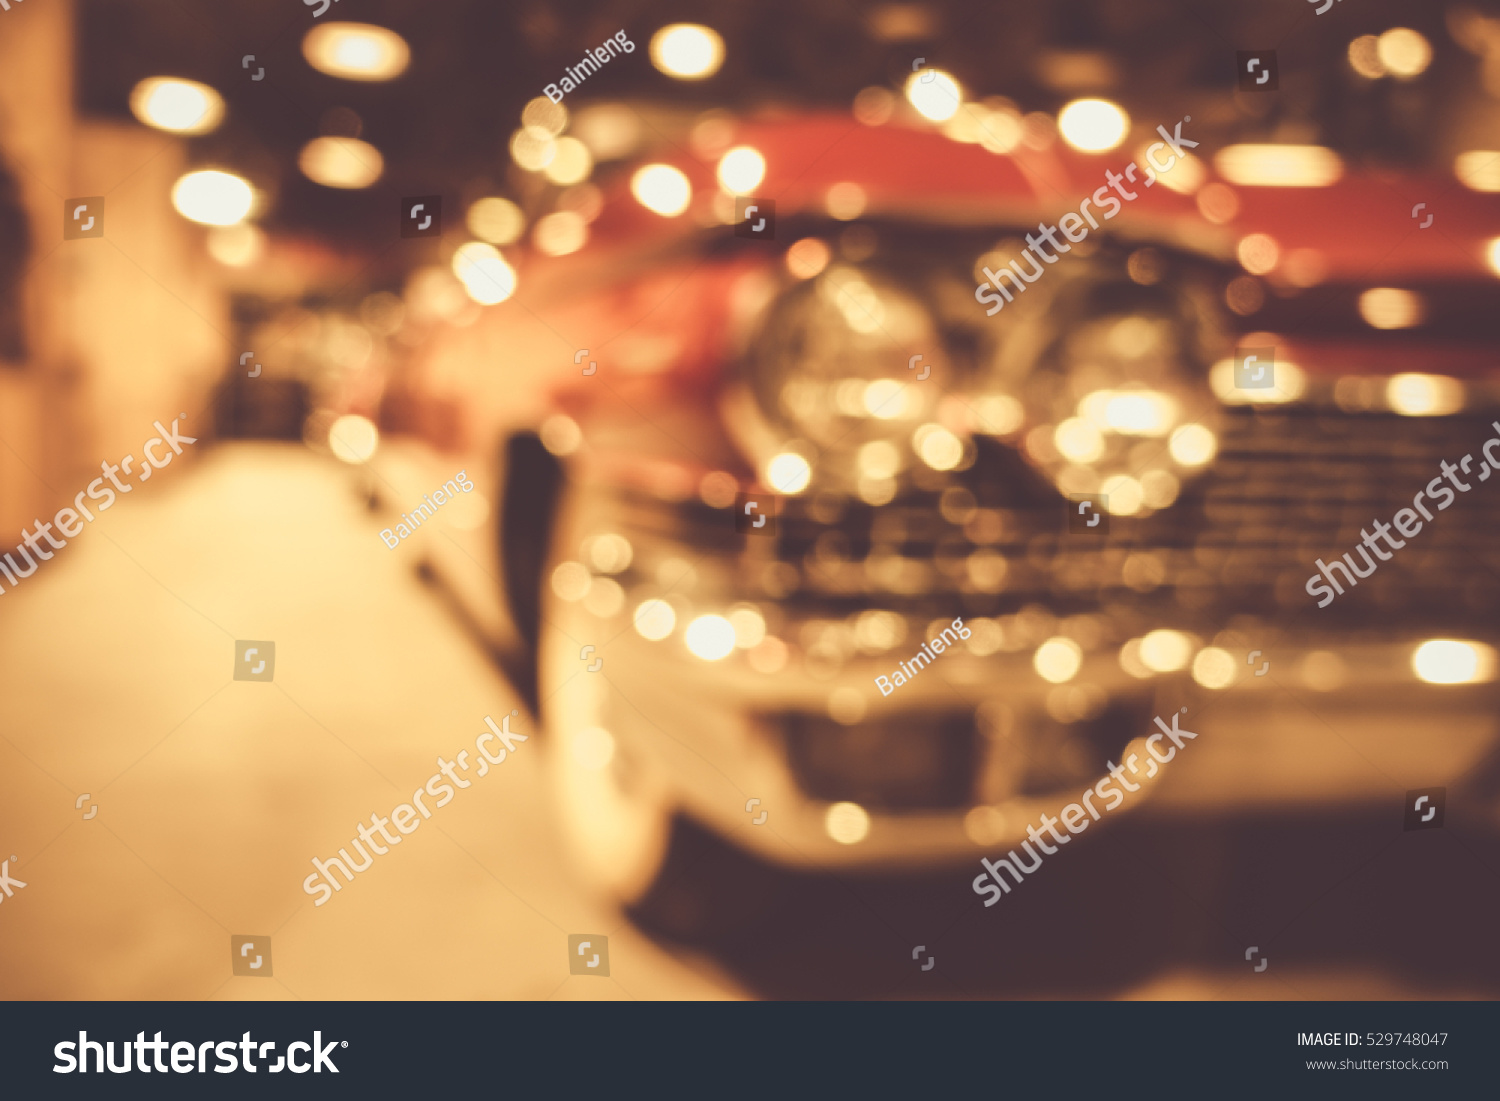 defocus or blur image of retro car and motorcycle, effect by vintage style #529748047